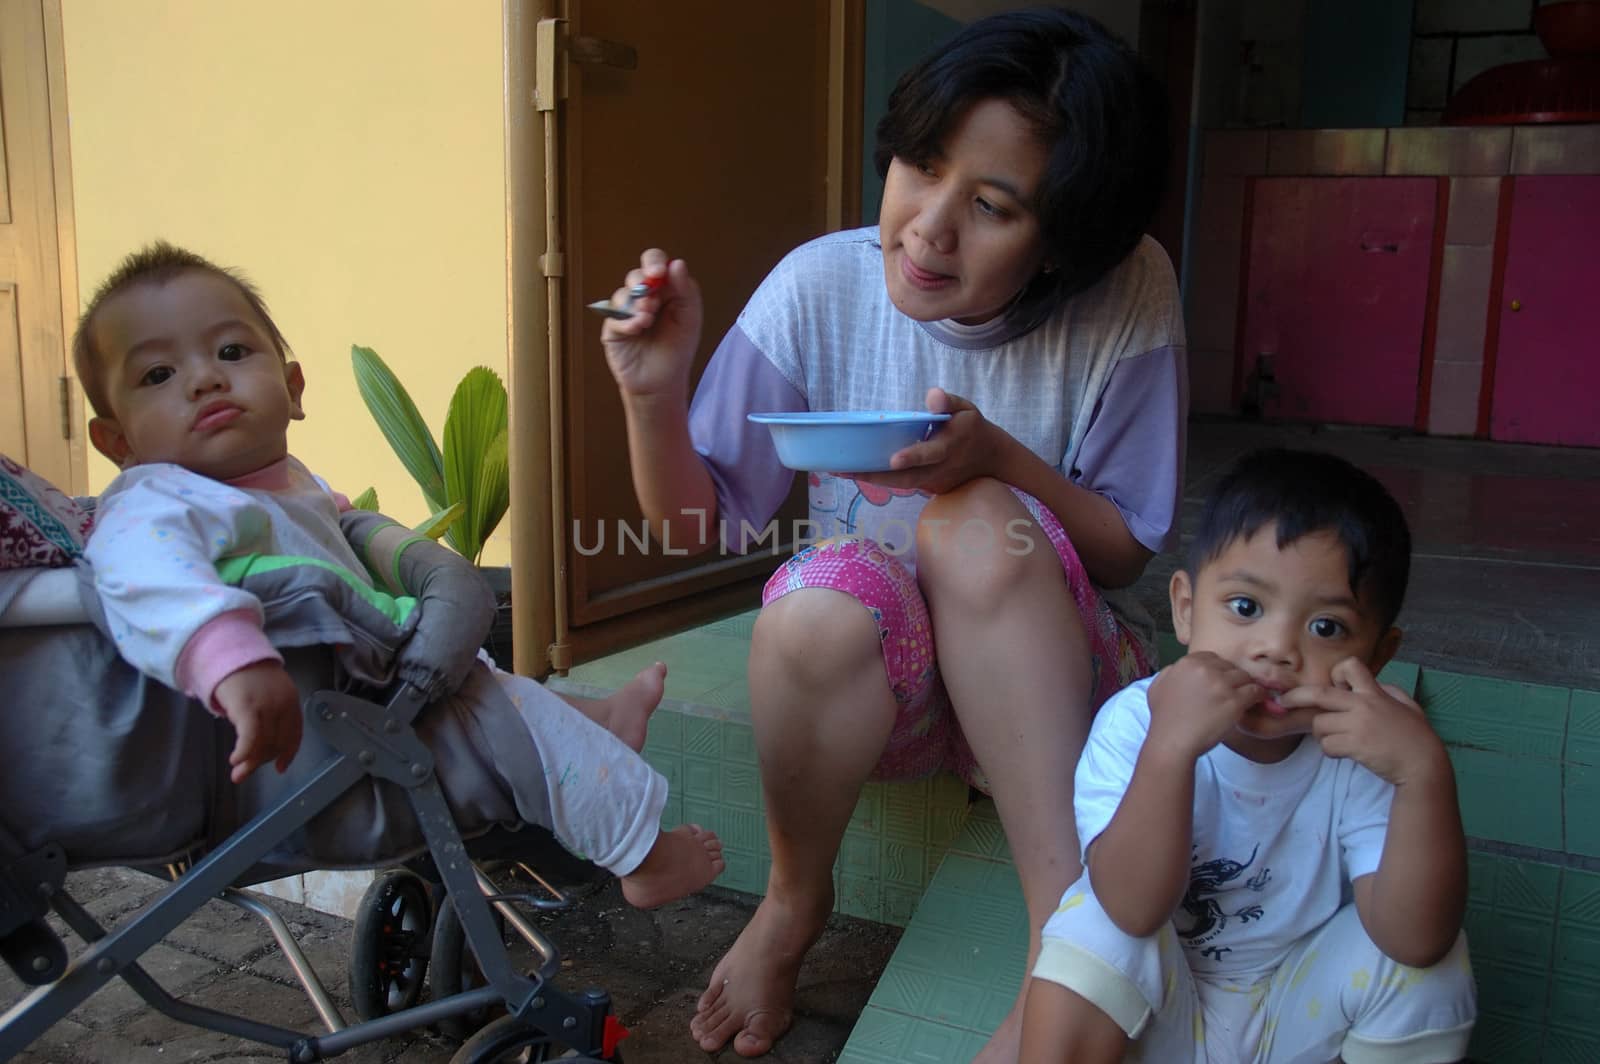 bandung, indonesia-december 19, 2010: family portrait that shown interaction between mother and kids.